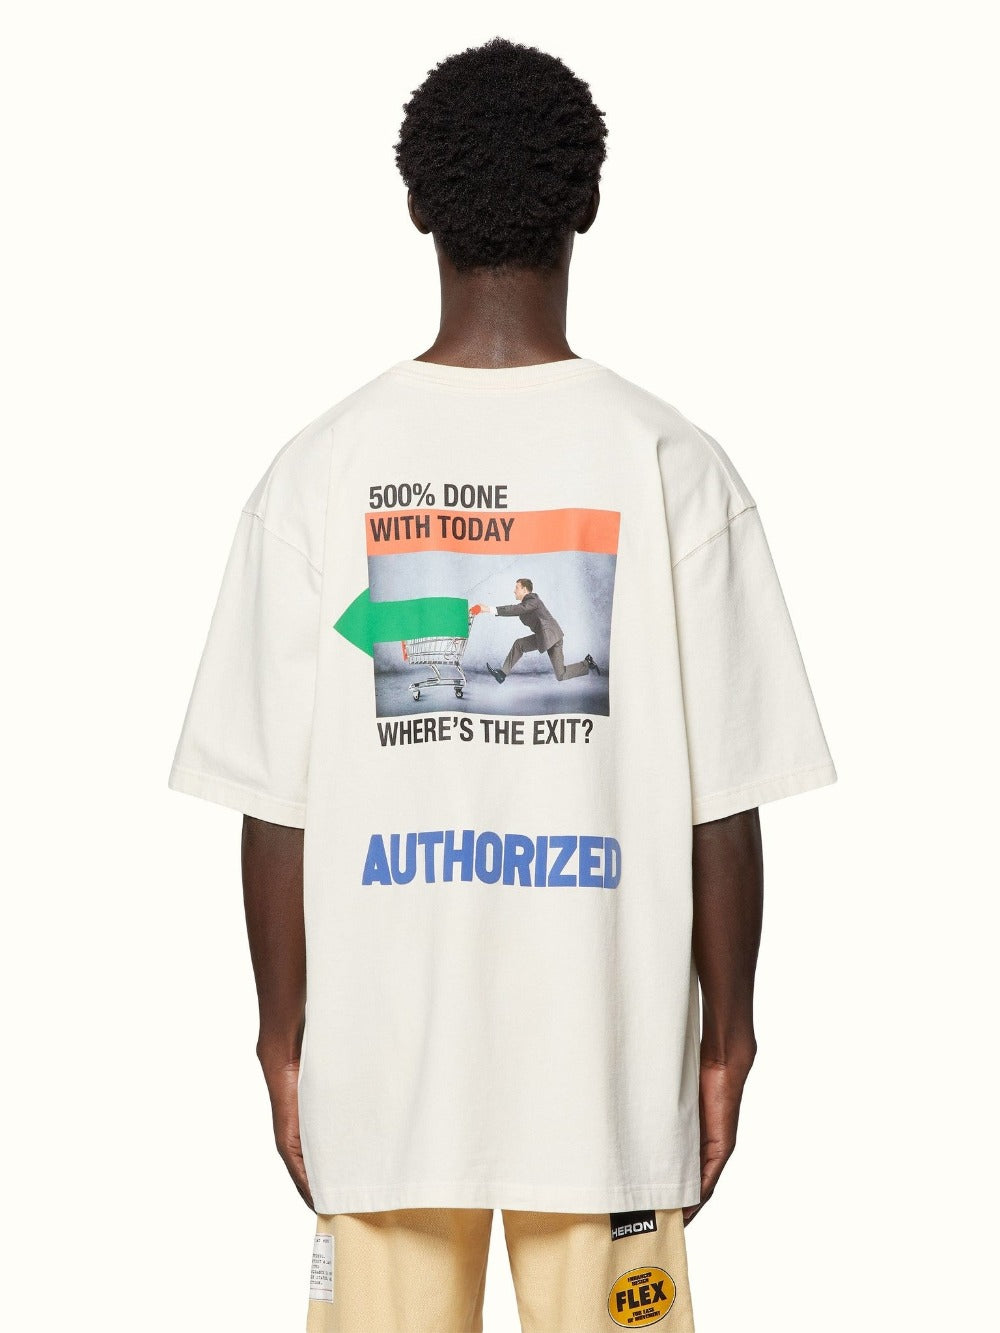 Heron Preston SS Tee OS A.F. Authorized Off-White | Hype Vault Kuala Lumpur | Asia's Top Trusted High-End Sneakers and Streetwear Store